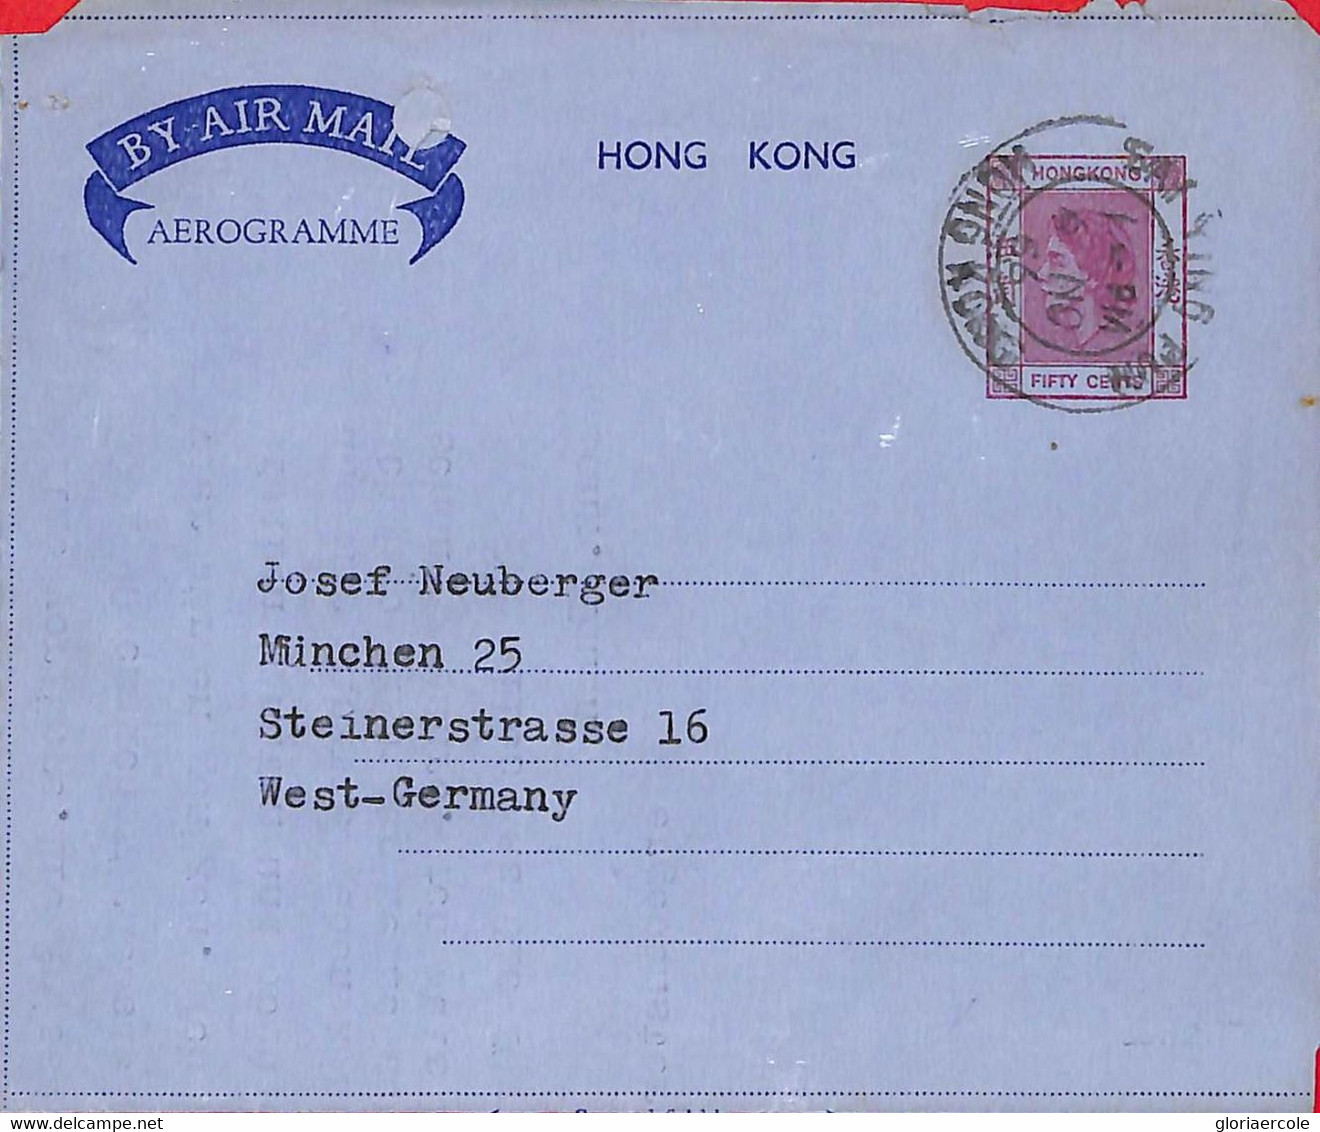 Aa6792 - HONG KONG - POSTAL HISTORY - Stationery AEROGRAMME From SAY YING PUN 1966 - Entiers Postaux